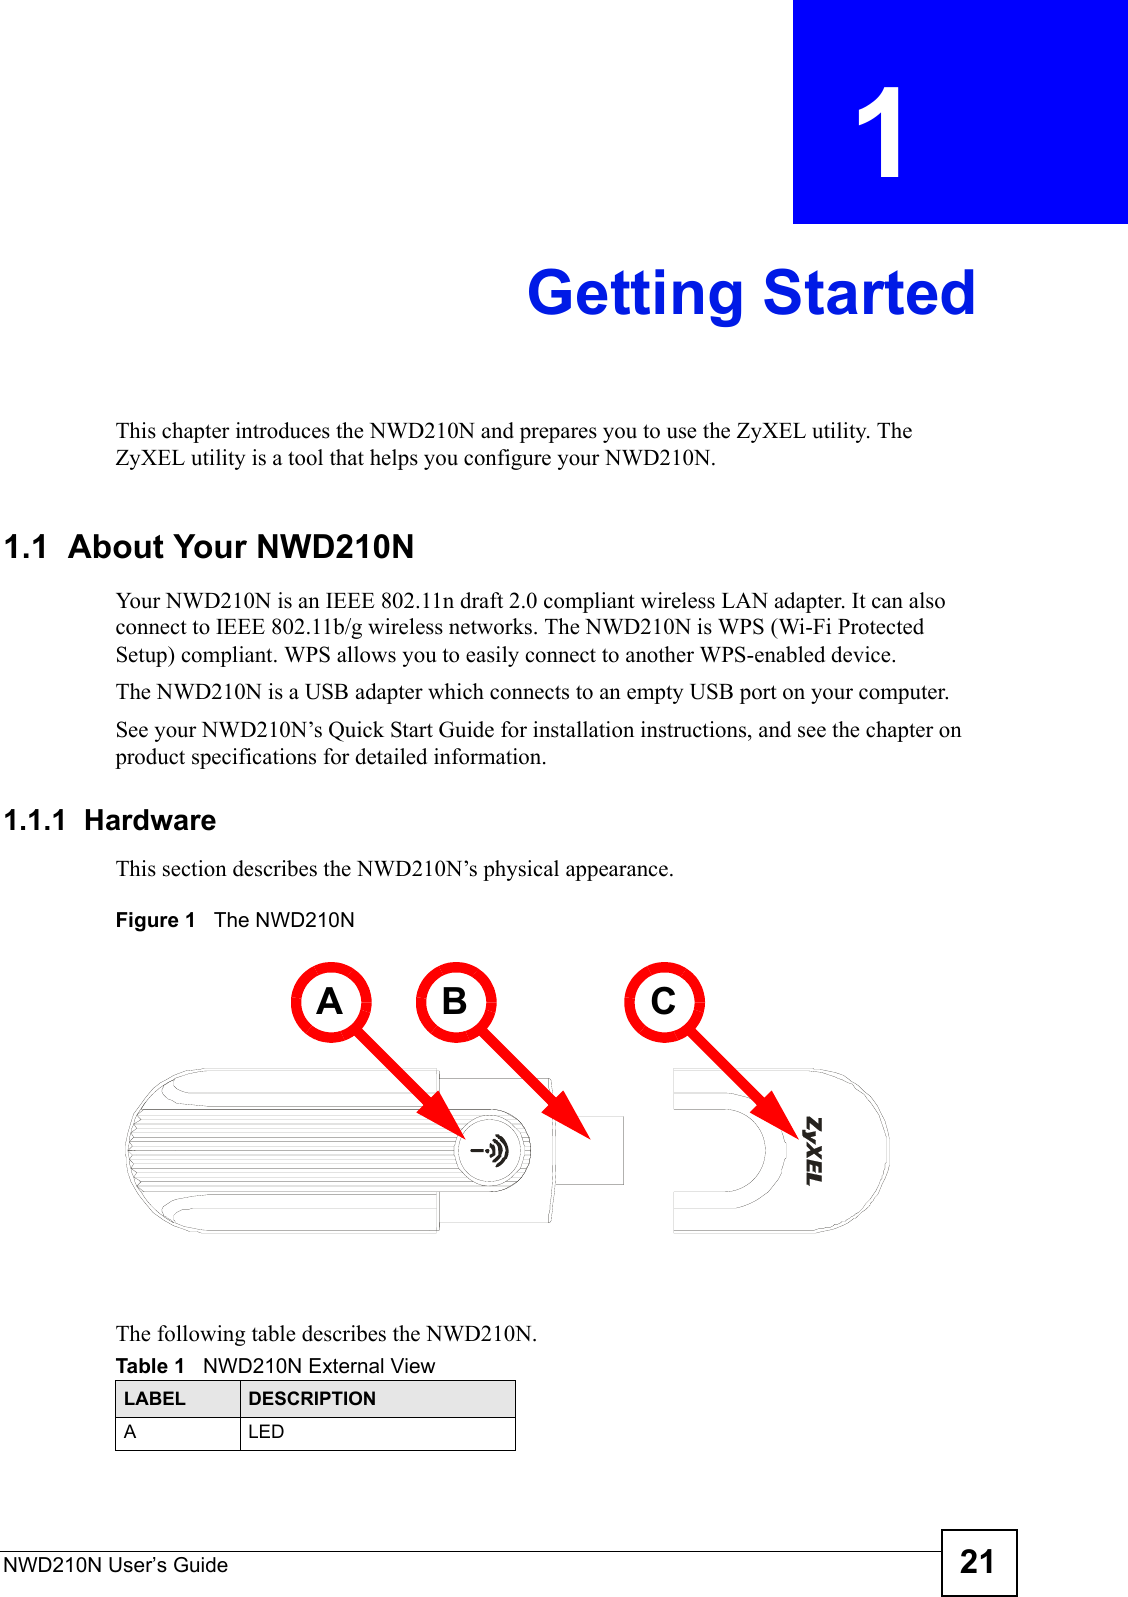 NWD210N User’s Guide 21CHAPTER  1 Getting StartedThis chapter introduces the NWD210N and prepares you to use the ZyXEL utility. The ZyXEL utility is a tool that helps you configure your NWD210N. 1.1  About Your NWD210N    Your NWD210N is an IEEE 802.11n draft 2.0 compliant wireless LAN adapter. It can also connect to IEEE 802.11b/g wireless networks. The NWD210N is WPS (Wi-Fi Protected Setup) compliant. WPS allows you to easily connect to another WPS-enabled device. The NWD210N is a USB adapter which connects to an empty USB port on your computer.See your NWD210N’s Quick Start Guide for installation instructions, and see the chapter on product specifications for detailed information.1.1.1  HardwareThis section describes the NWD210N’s physical appearance.Figure 1   The NWD210NThe following table describes the NWD210N.Table 1   NWD210N External ViewLABEL DESCRIPTIONALEDA B C